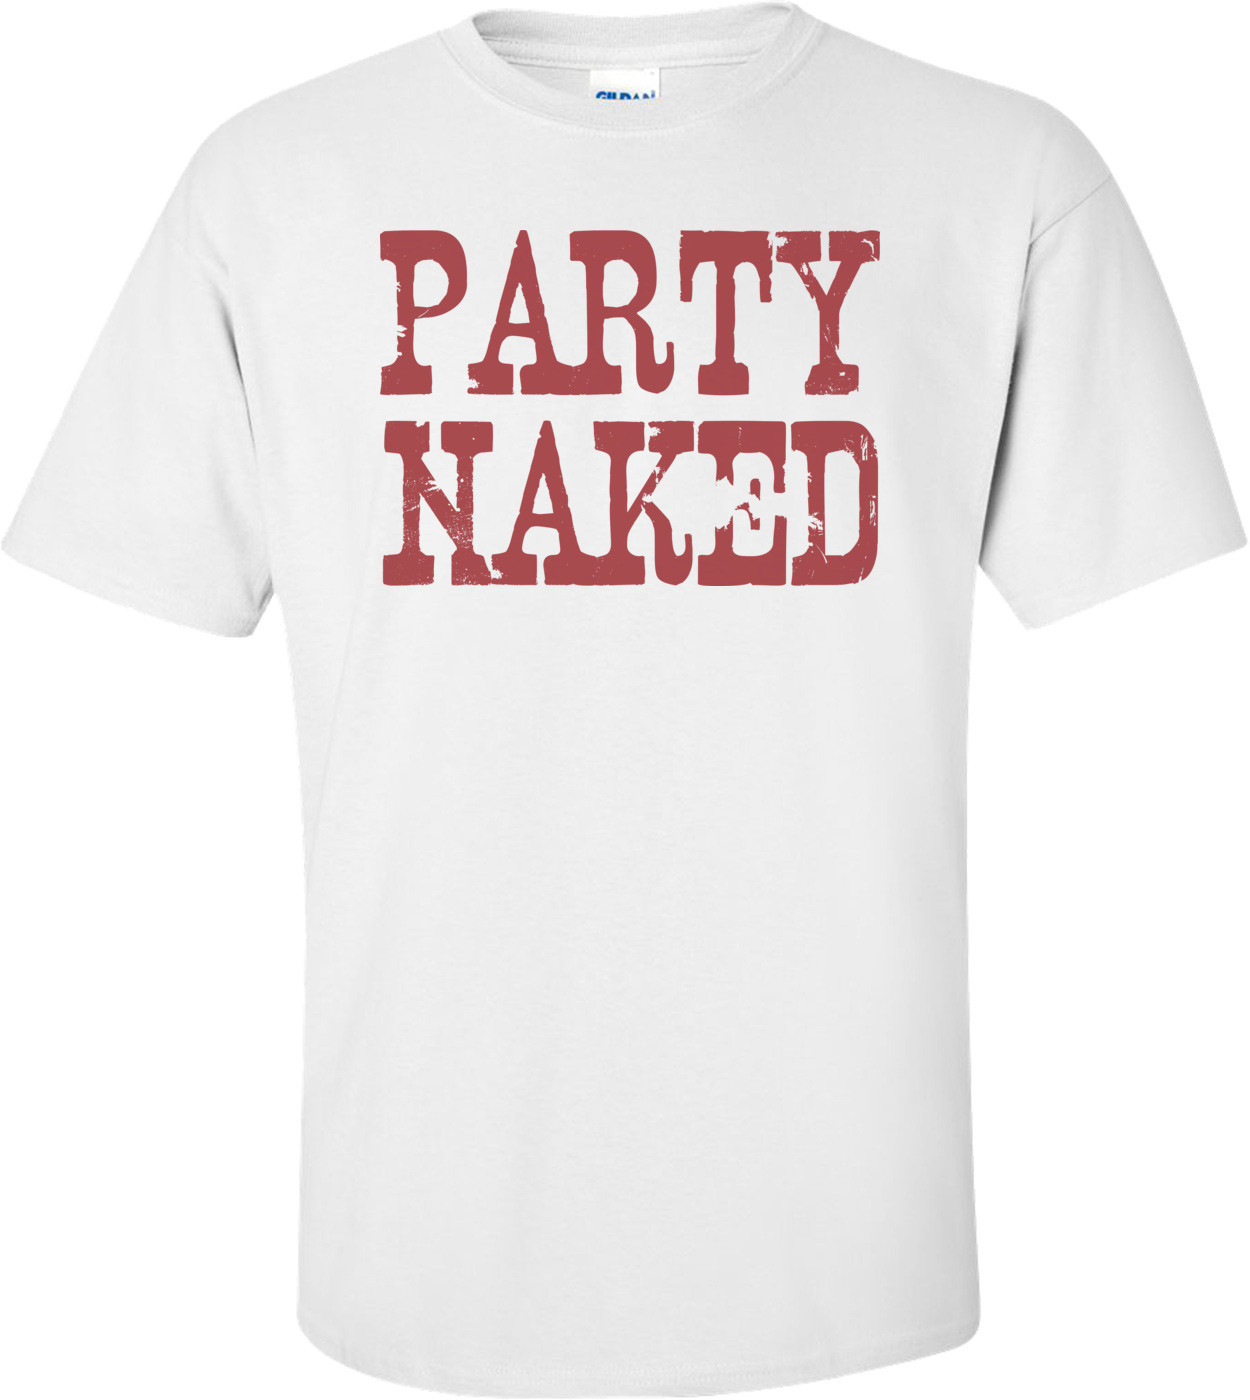 Party Naked T-shirt